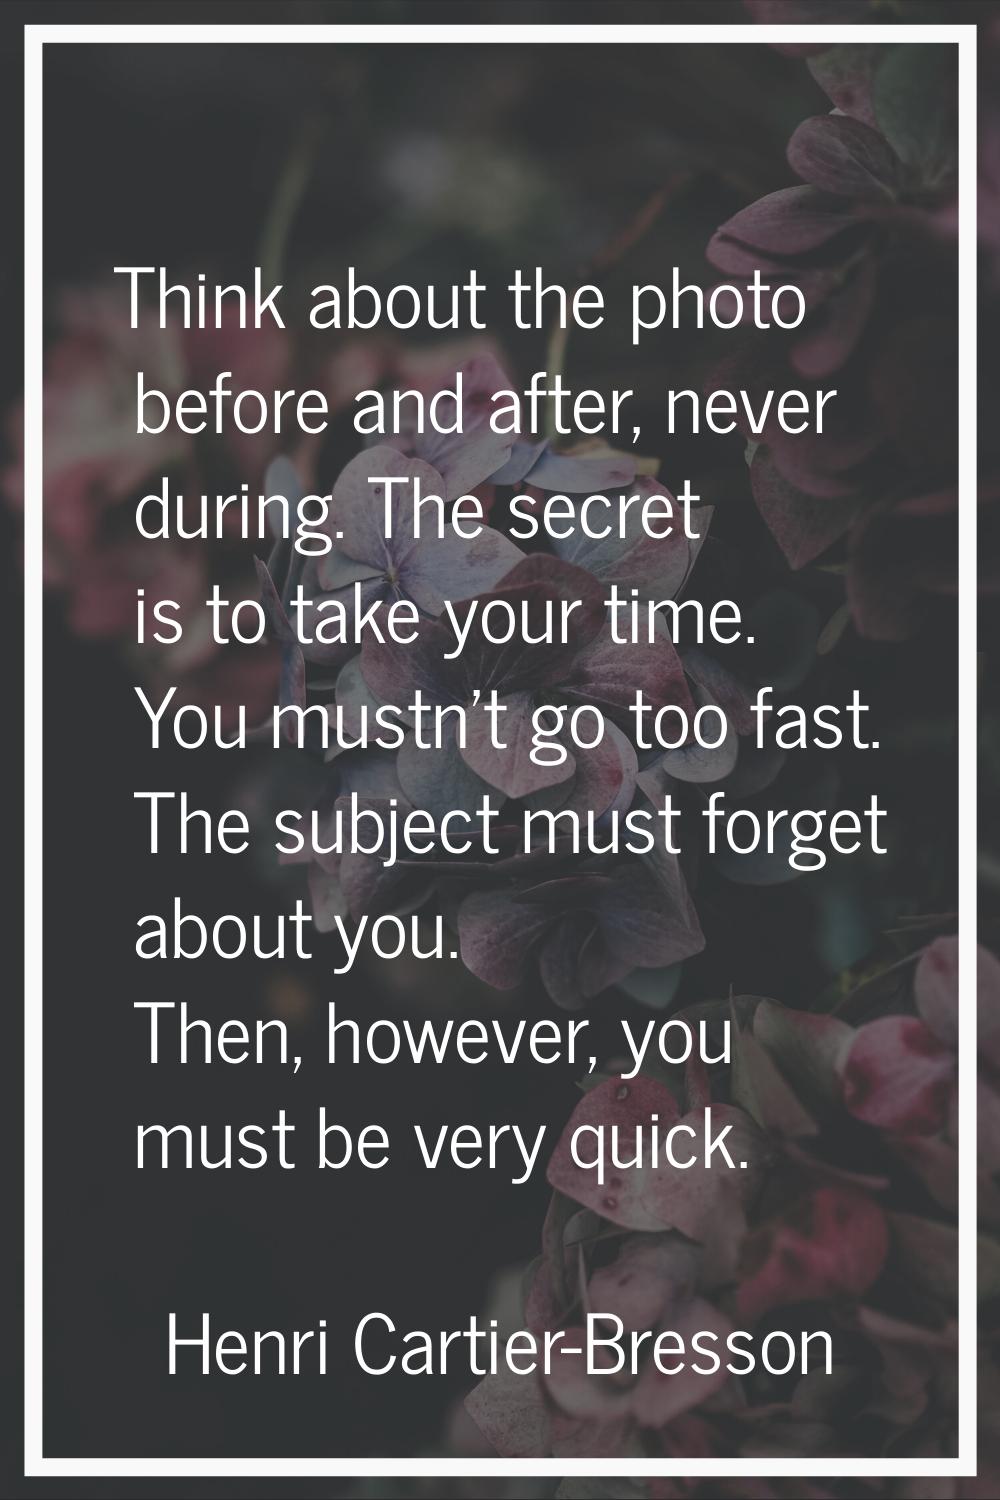 Think about the photo before and after, never during. The secret is to take your time. You mustn't 